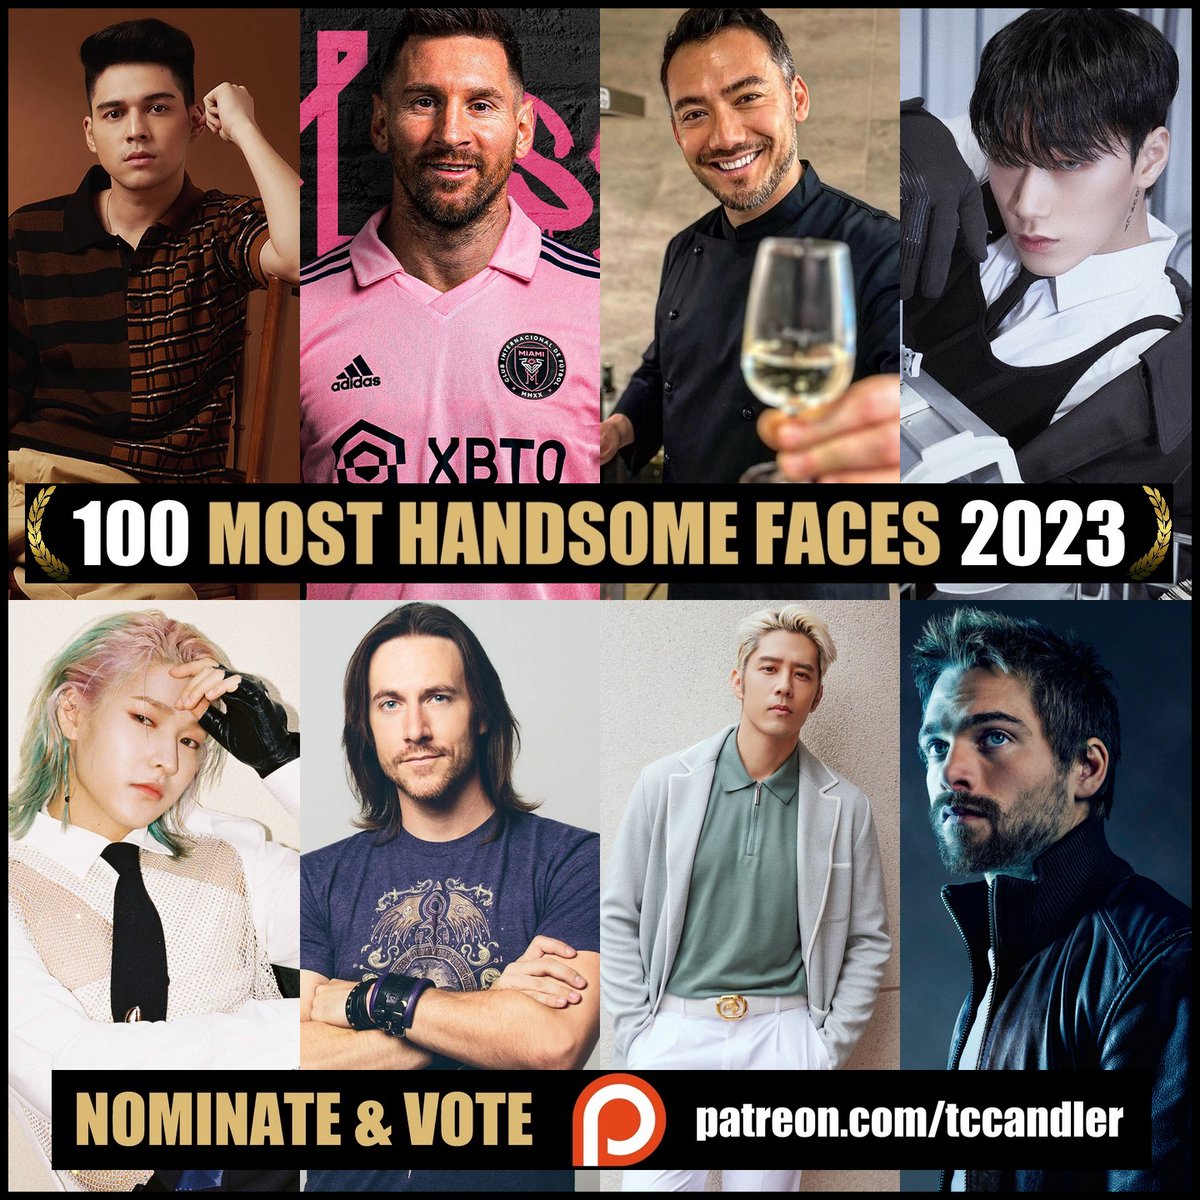 Nominations: 100 Most Handsome Faces of 2023. Congratulations to all! If you'd like to nominate & vote, please join Patreon (Link Bio). #TCCandler #100faces2023 #maximebouttier #Messi #LionelMessi  #san #ateez #junji #OnlyOneOf #georgehu #dylansprayberry